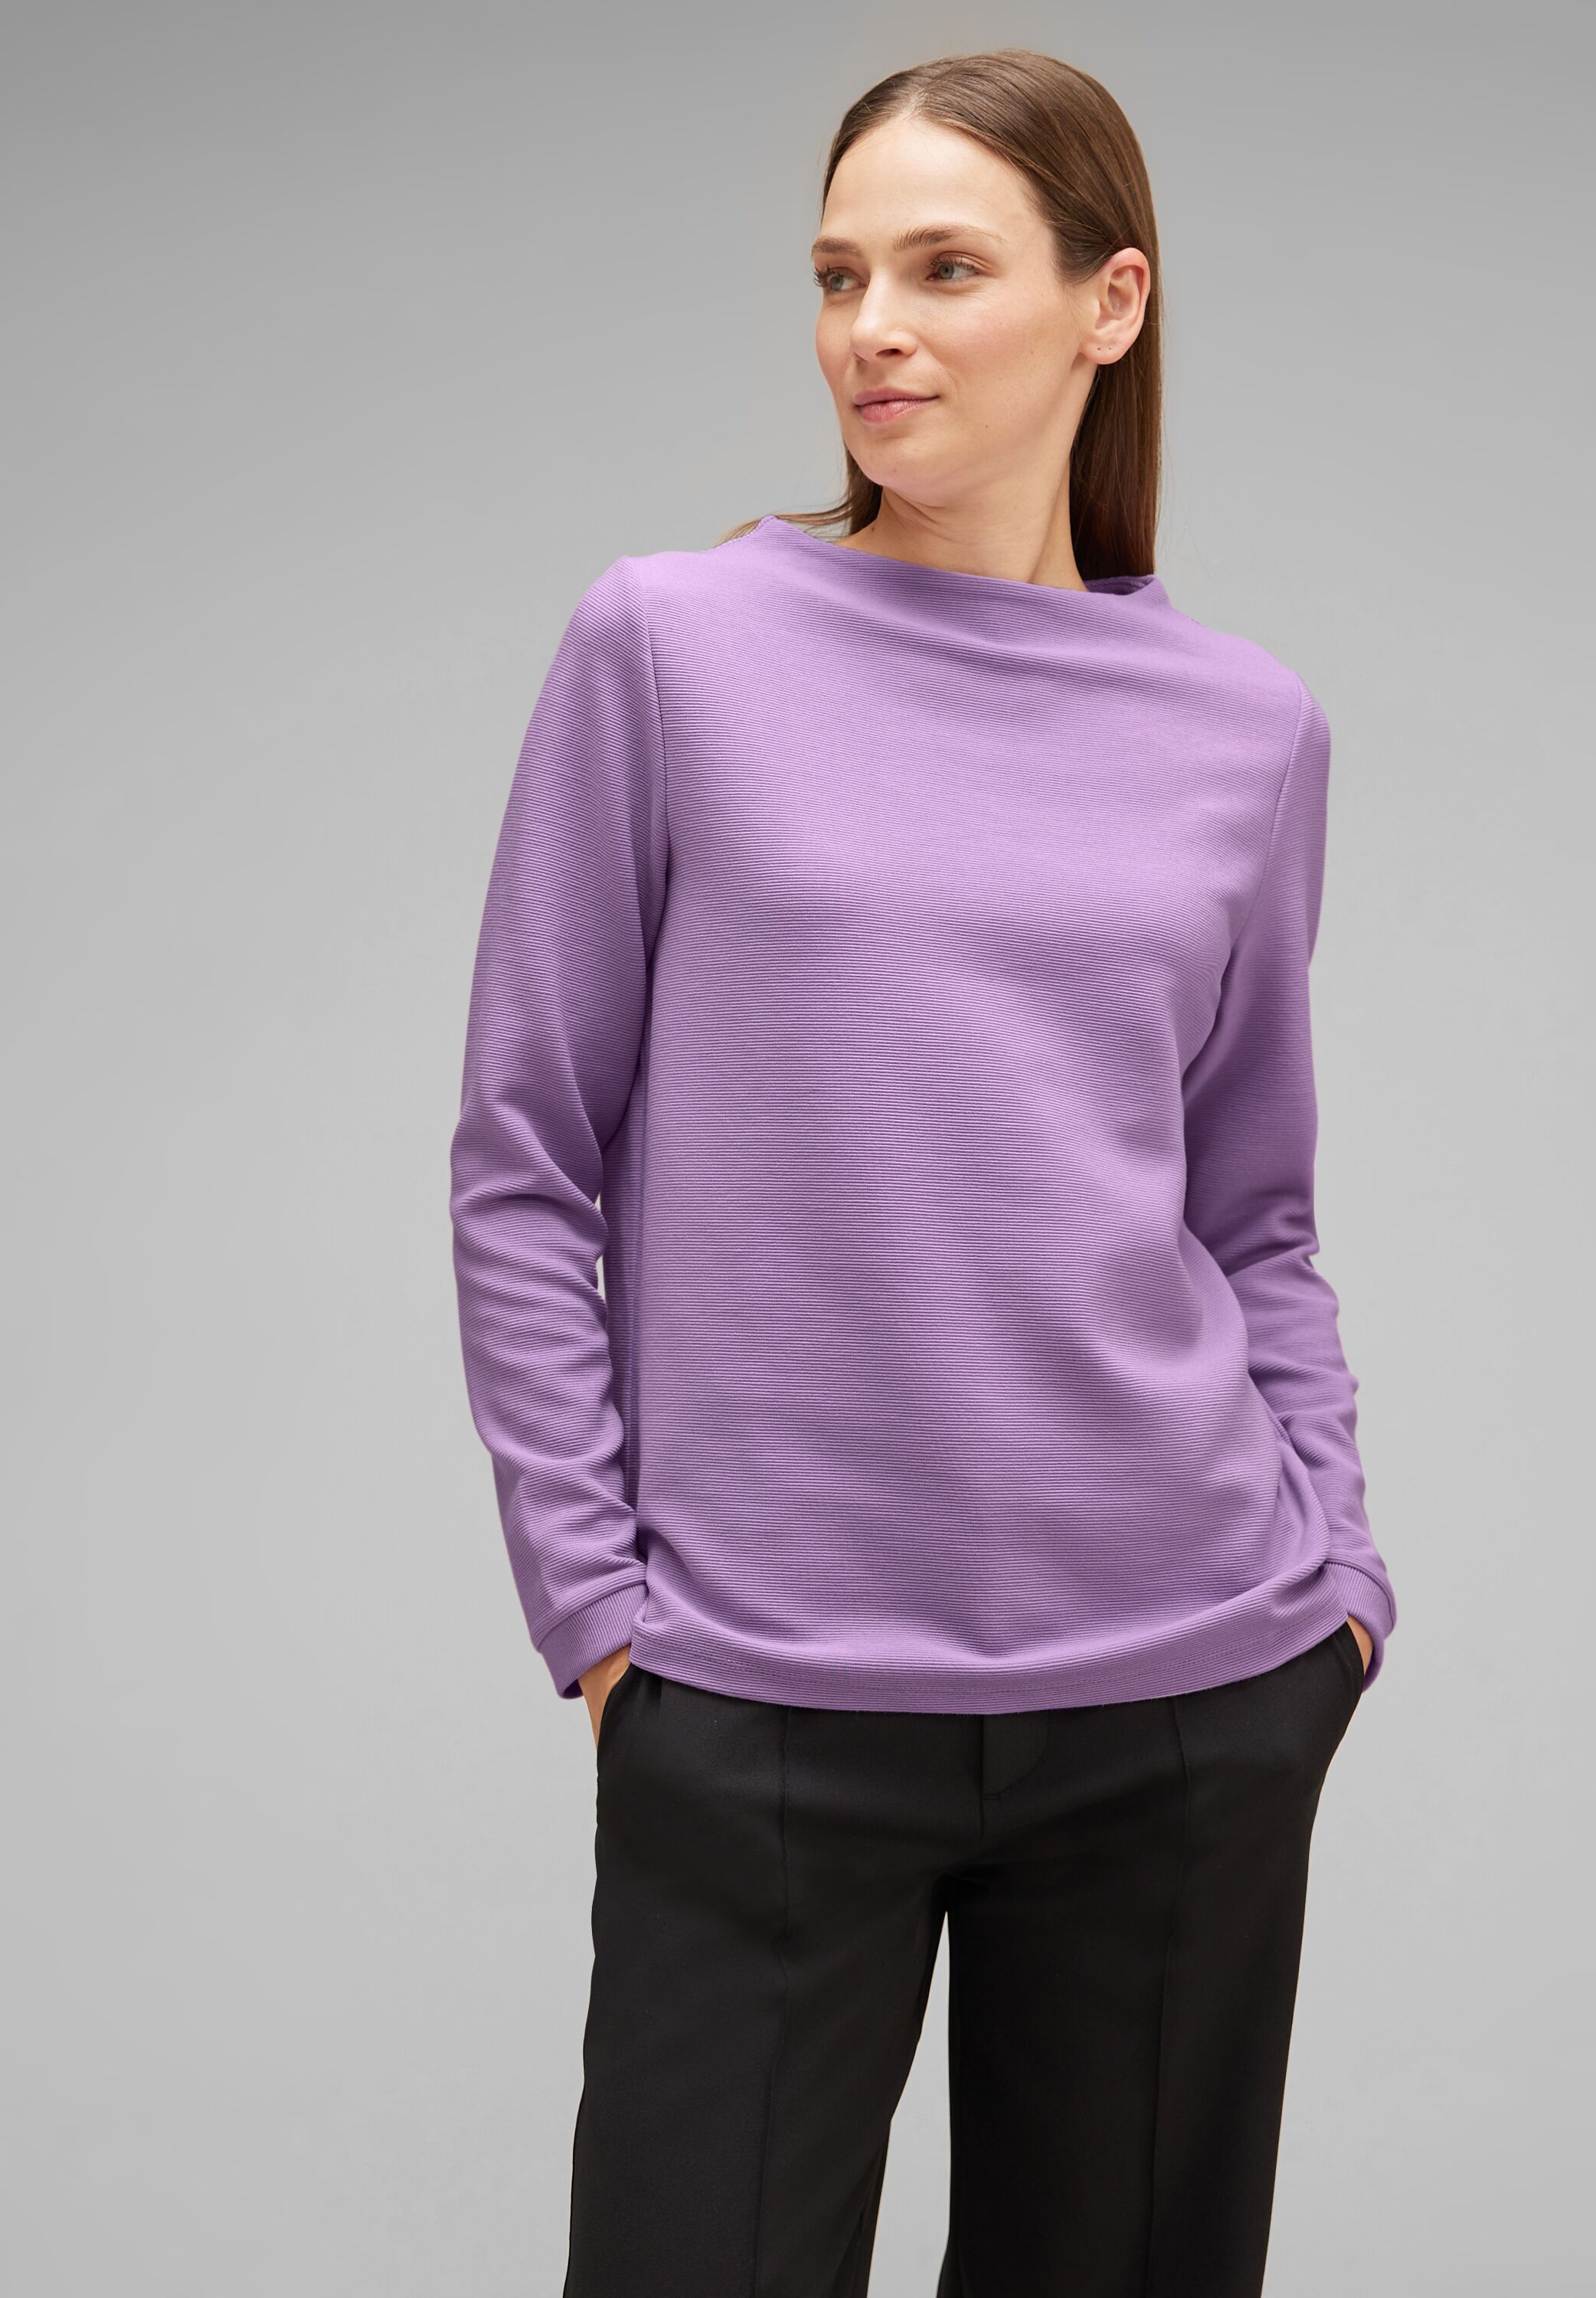 A320576-15289 reduziert Soft - im CONCEPT Pure Street in One SALE Mode Lilac Langarmshirt